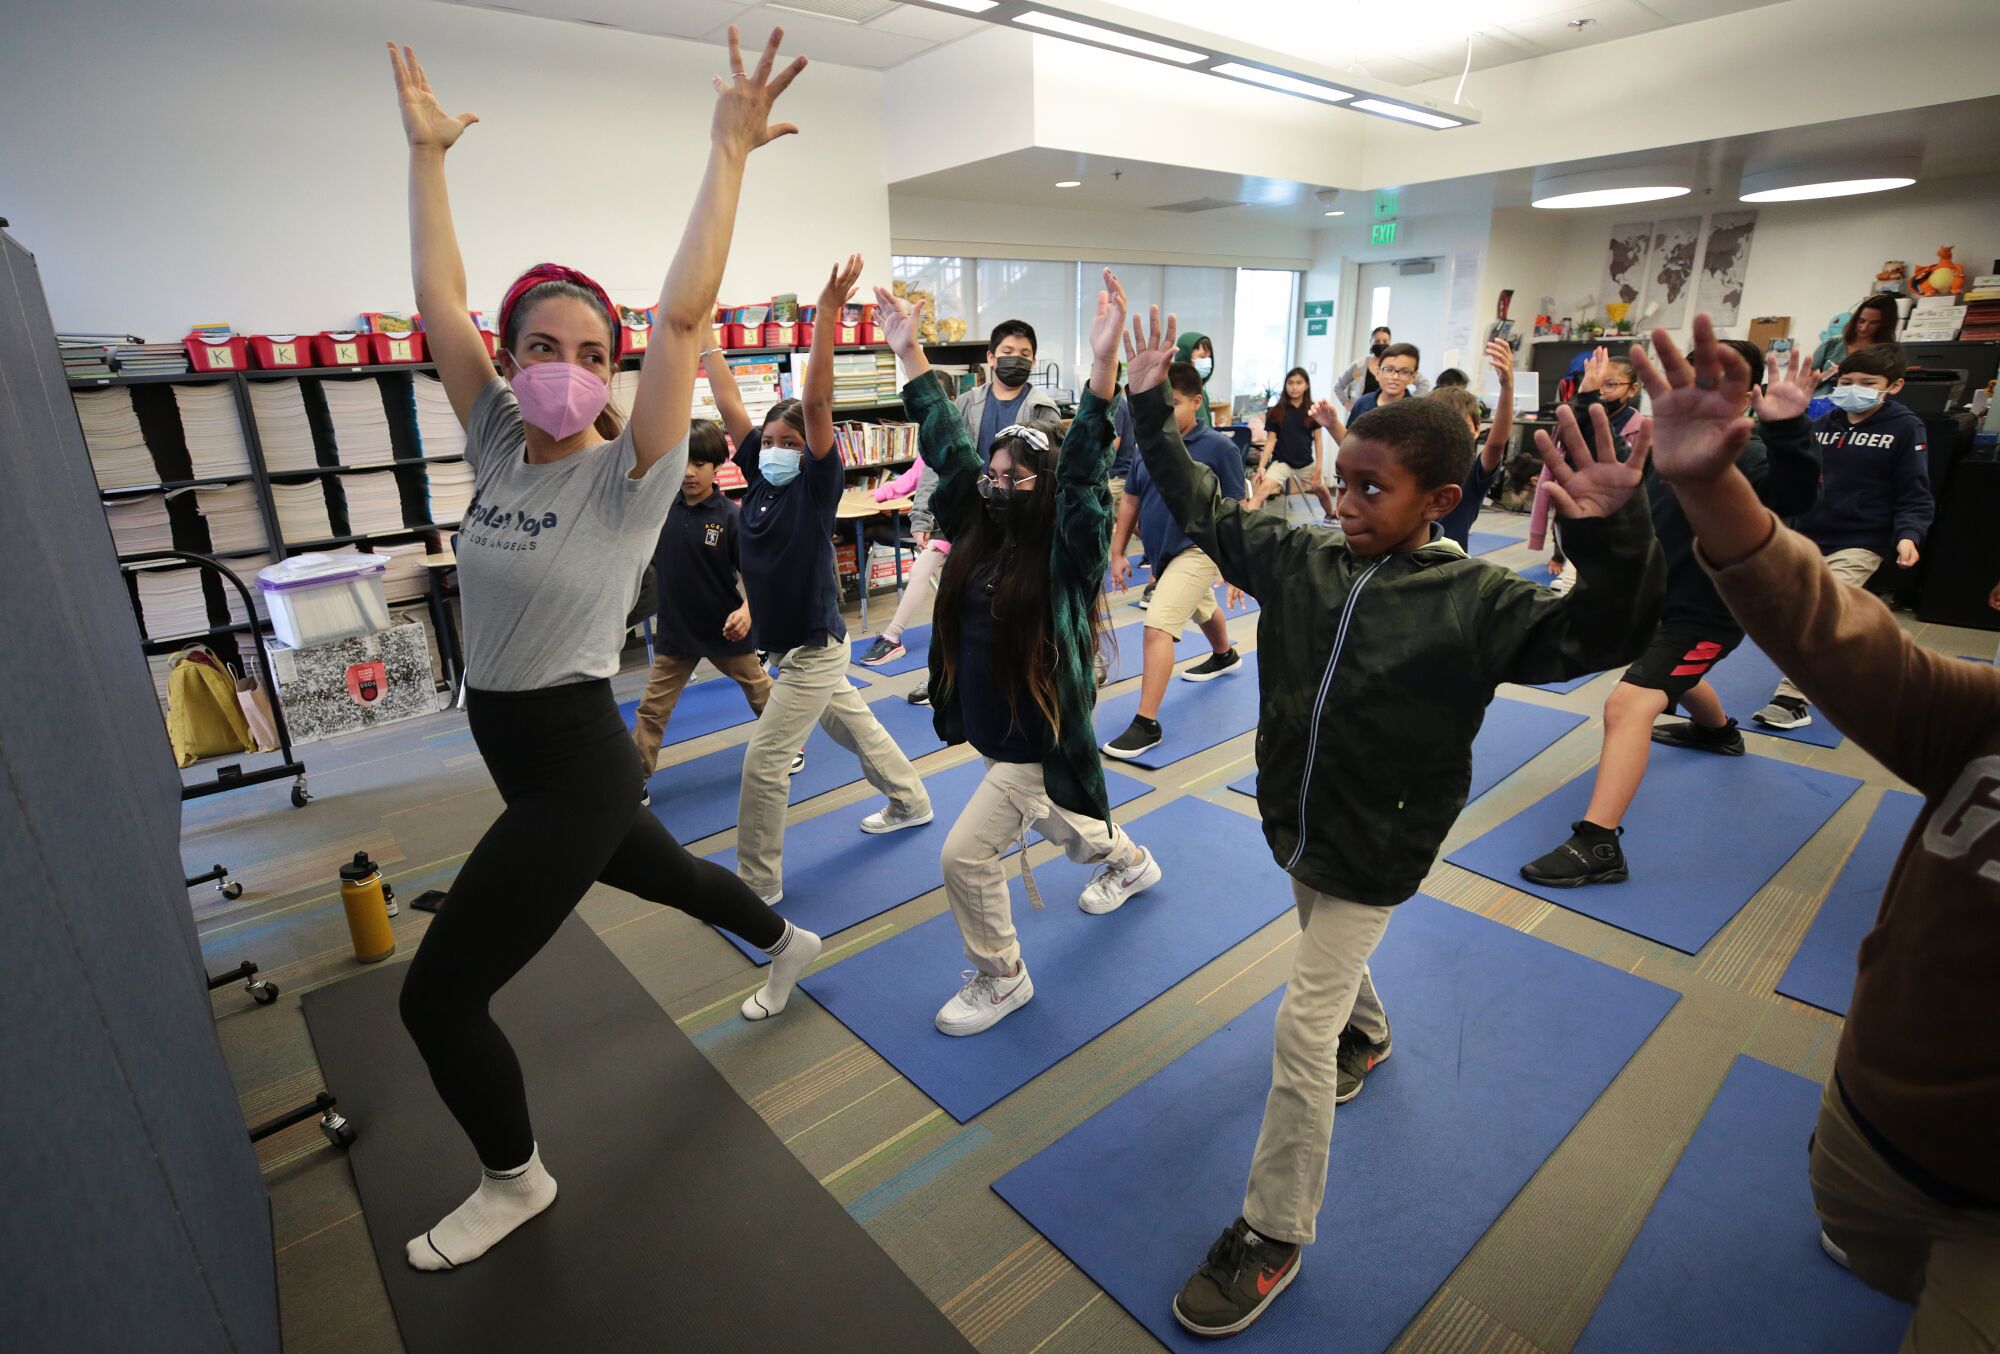 Leah Rose Gallegos co-founder of People's Yoga, leads a class of fifth-graders.